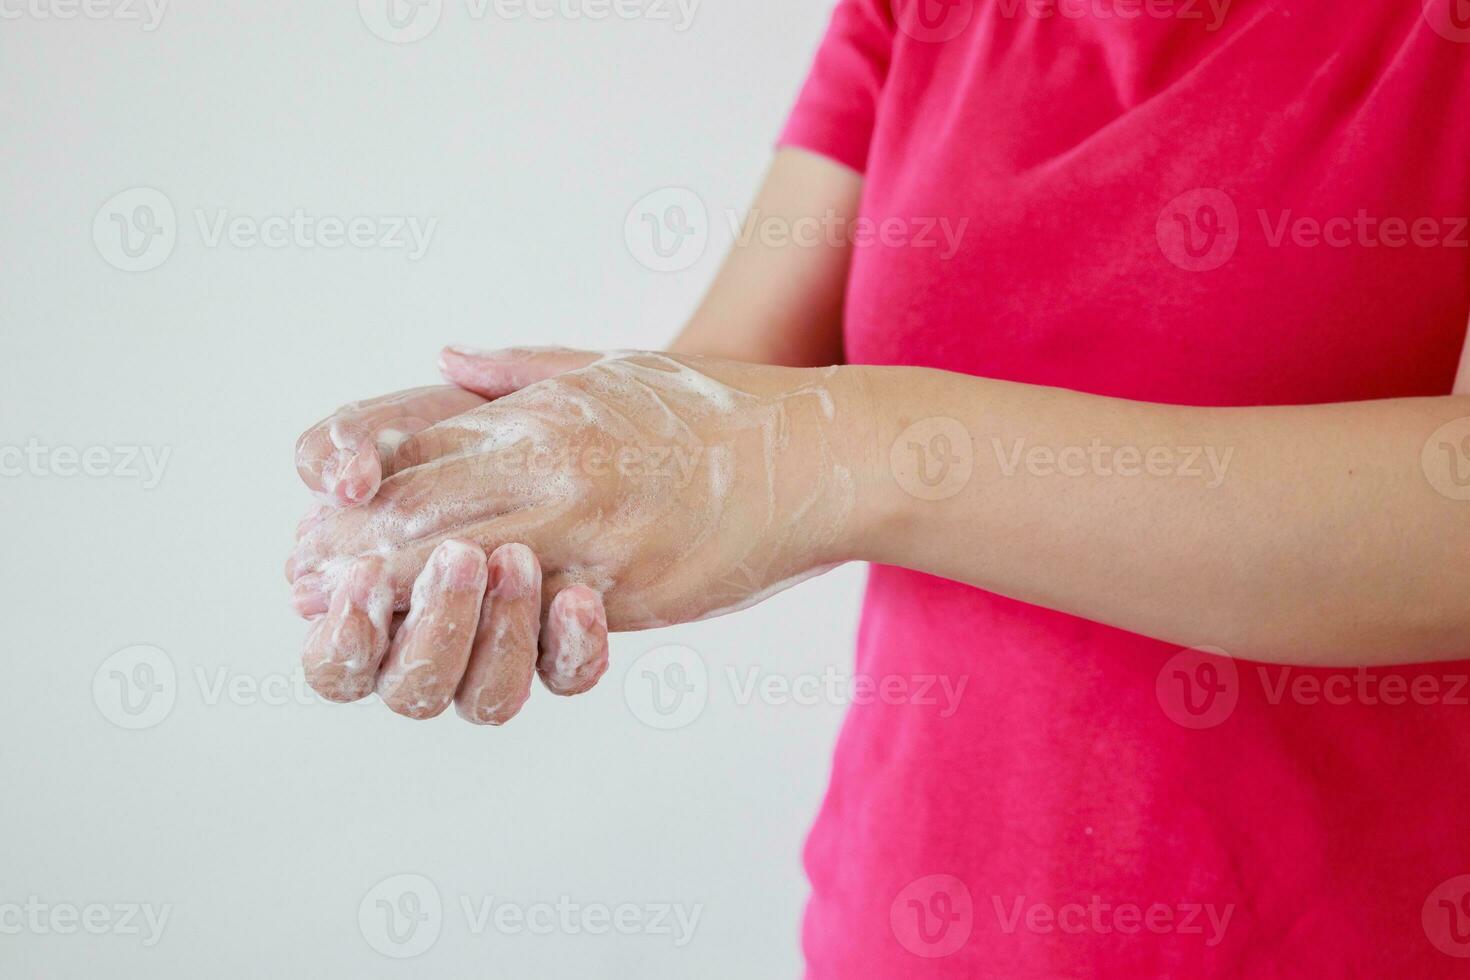 Woman washing hands with soap for COVID-19 corona virus prevention concept photo